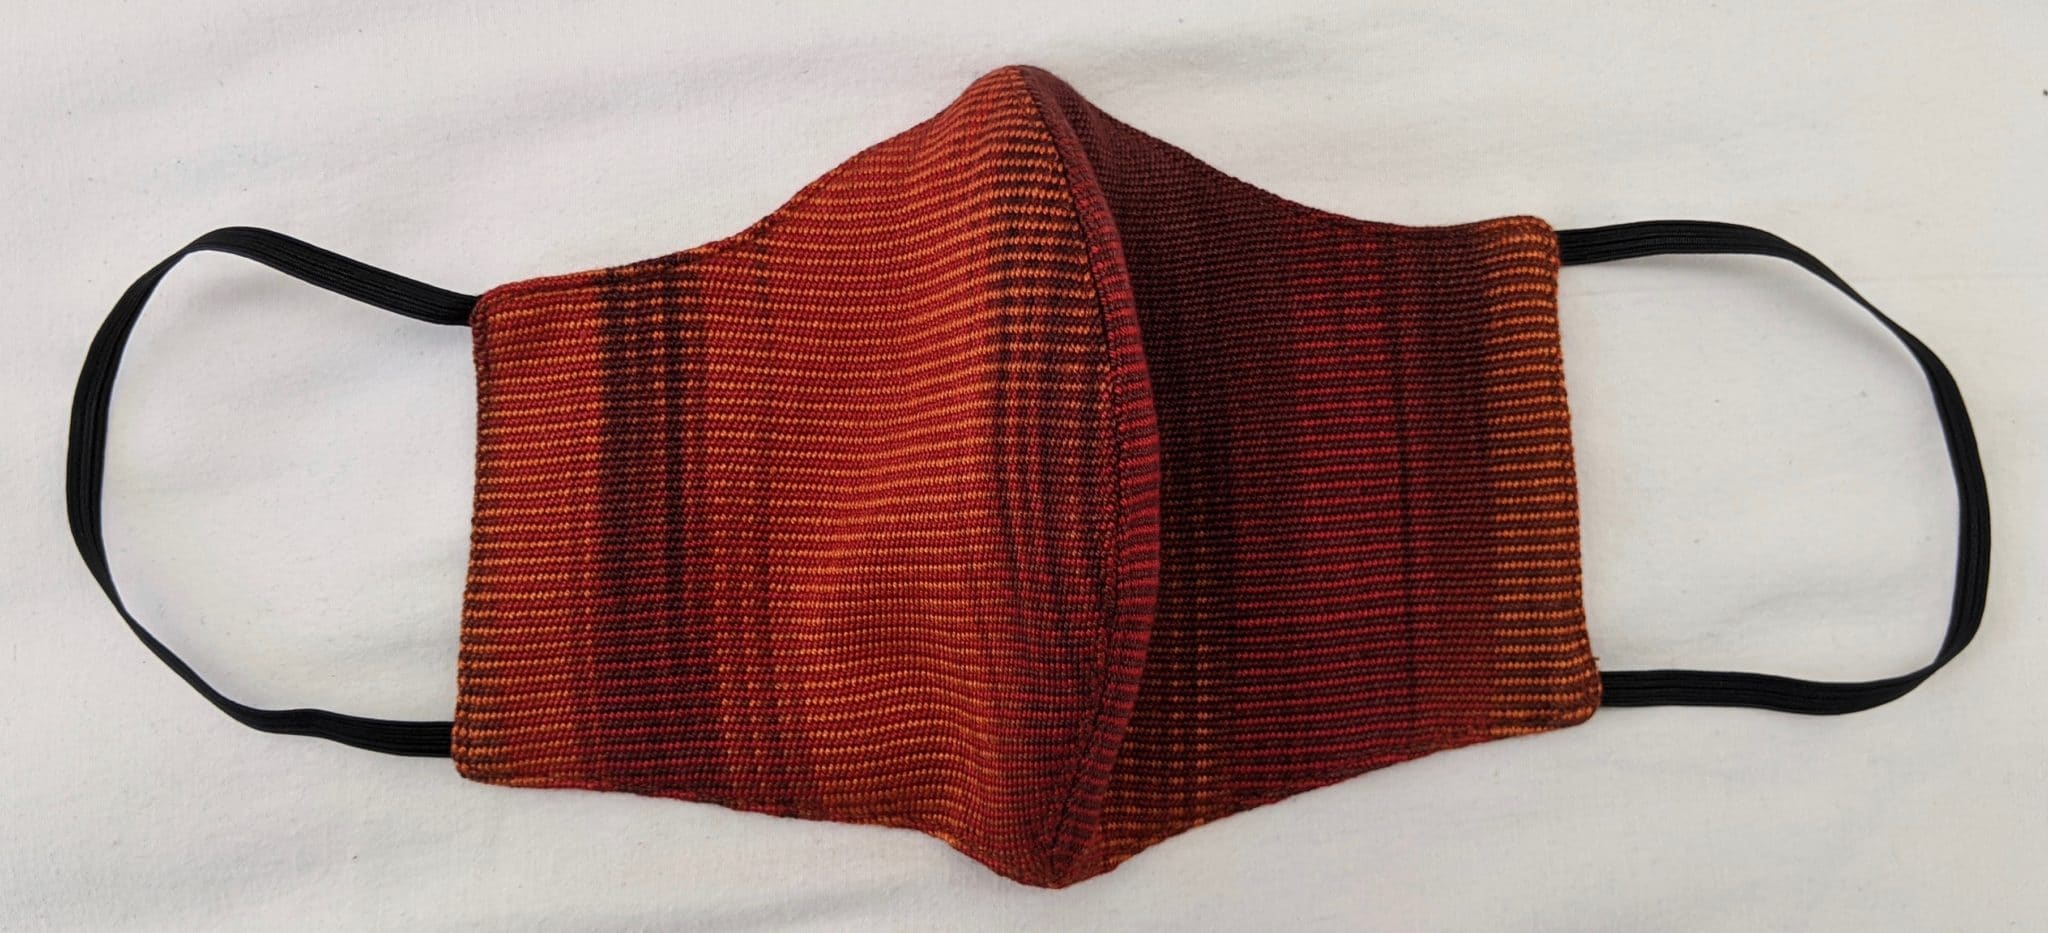 Handwoven Lightweight Bamboo Face Mask with Elastic Behind Ears - Rich Reds, Copper